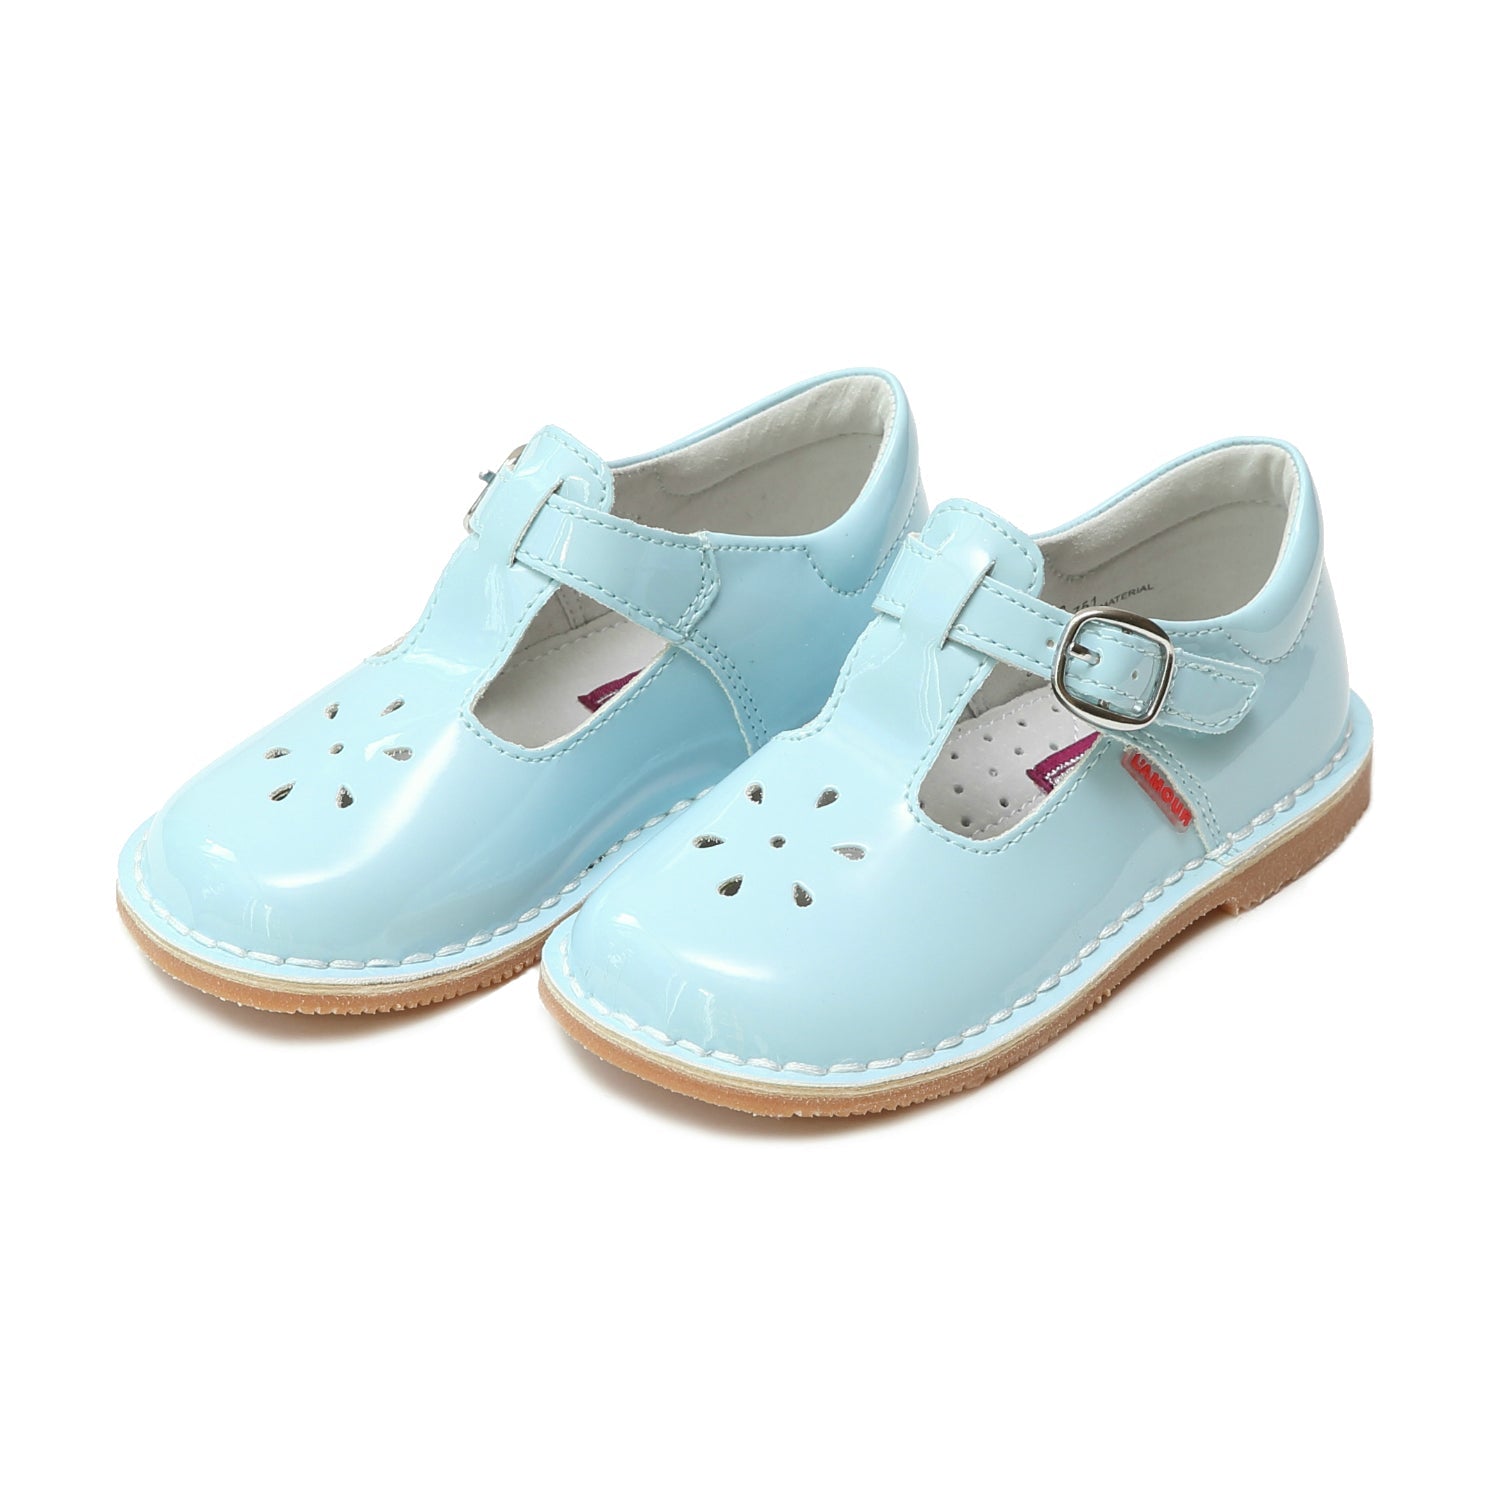 L'Amour Joy Classic Patent T-Strap Mary Jane Mary Janes